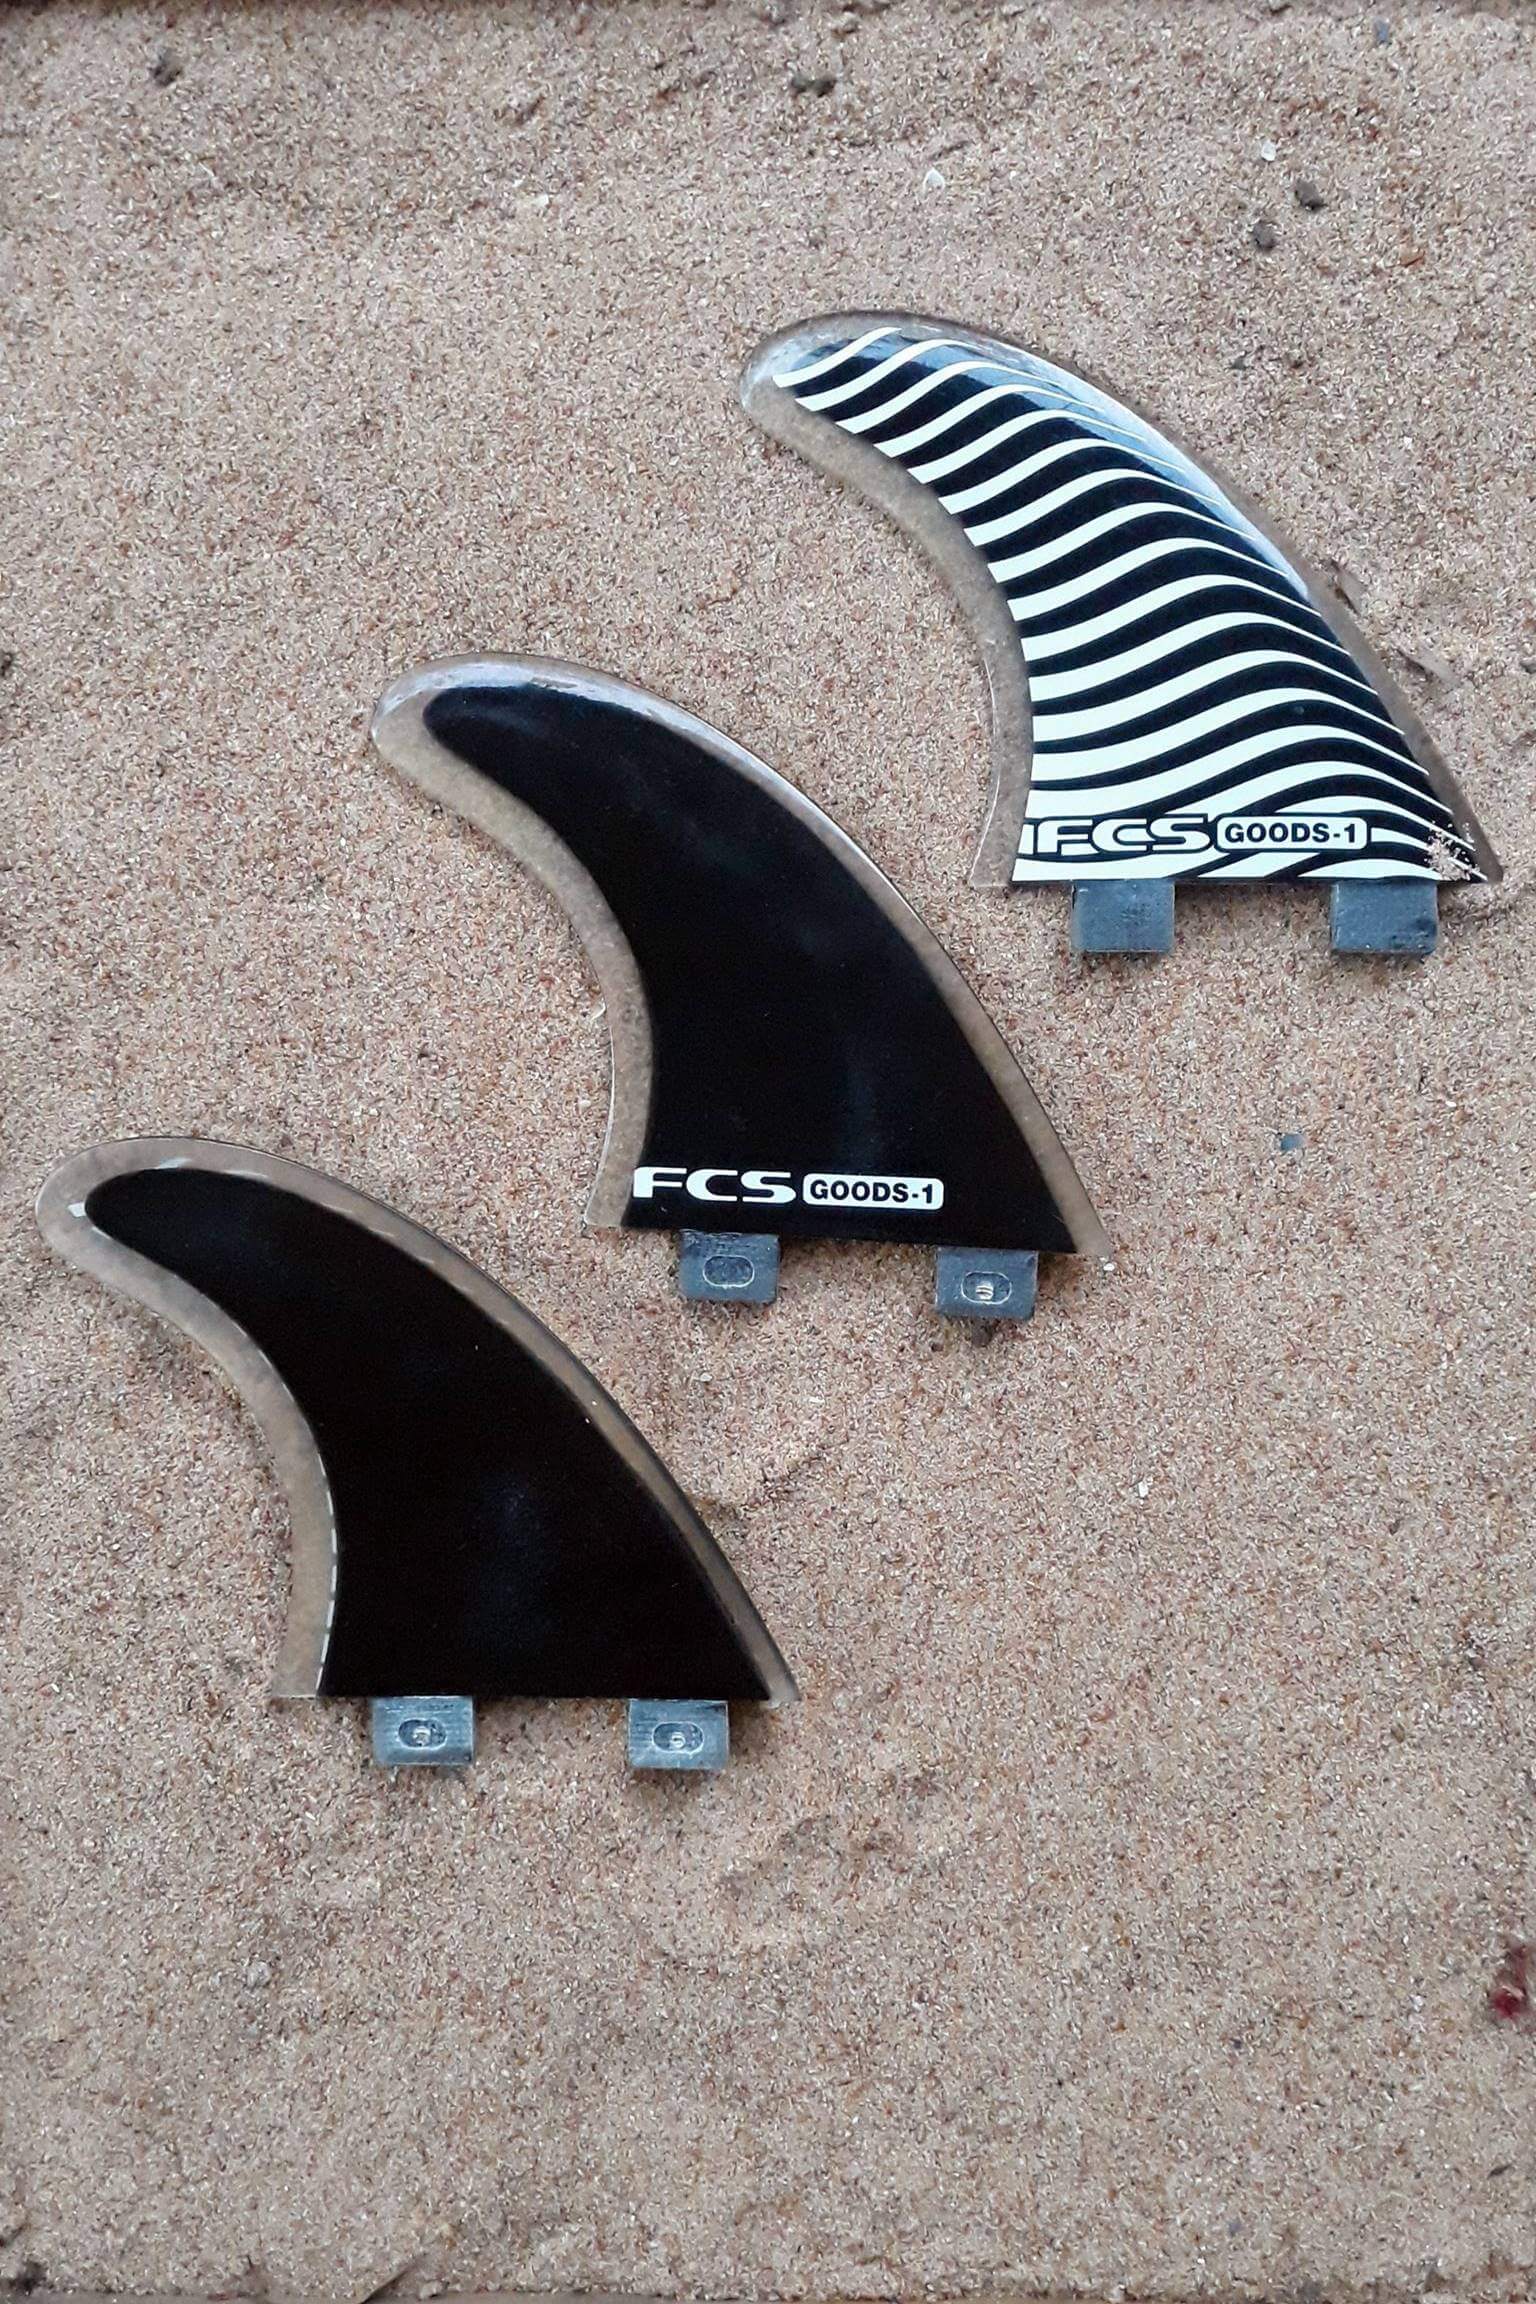 Z Sold – FINS – FCS GOODS-1 Thrusters